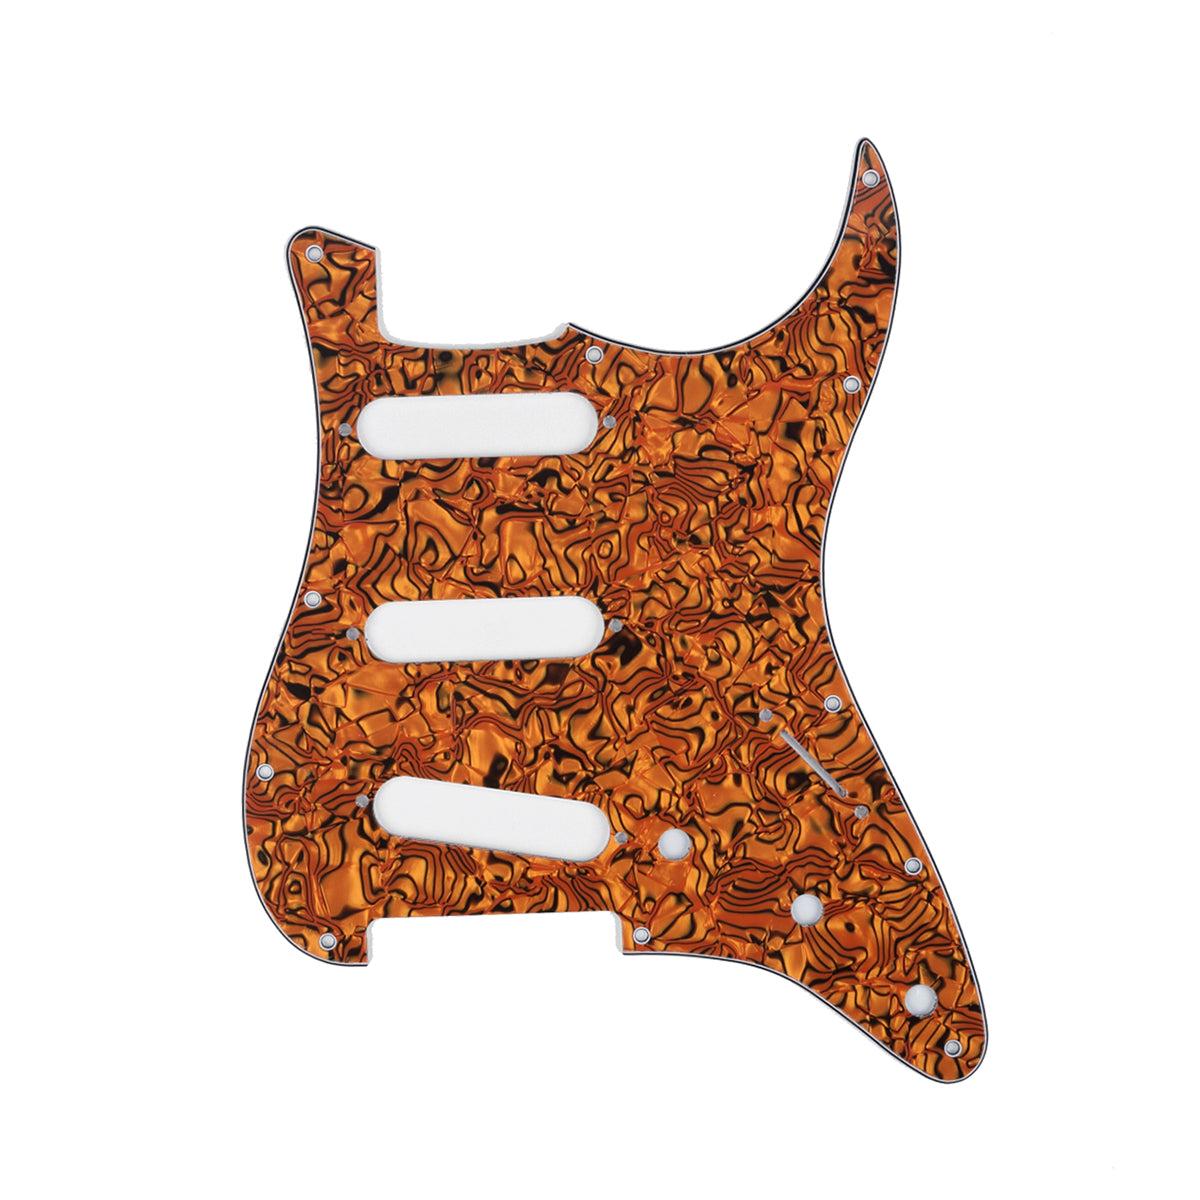 Musiclily SSS 11 Hole Strat Guitar Pickguard for Fender USA/Mexican Made Standard Stratocaster Modern Style, 4Ply Tiger Spot Shell